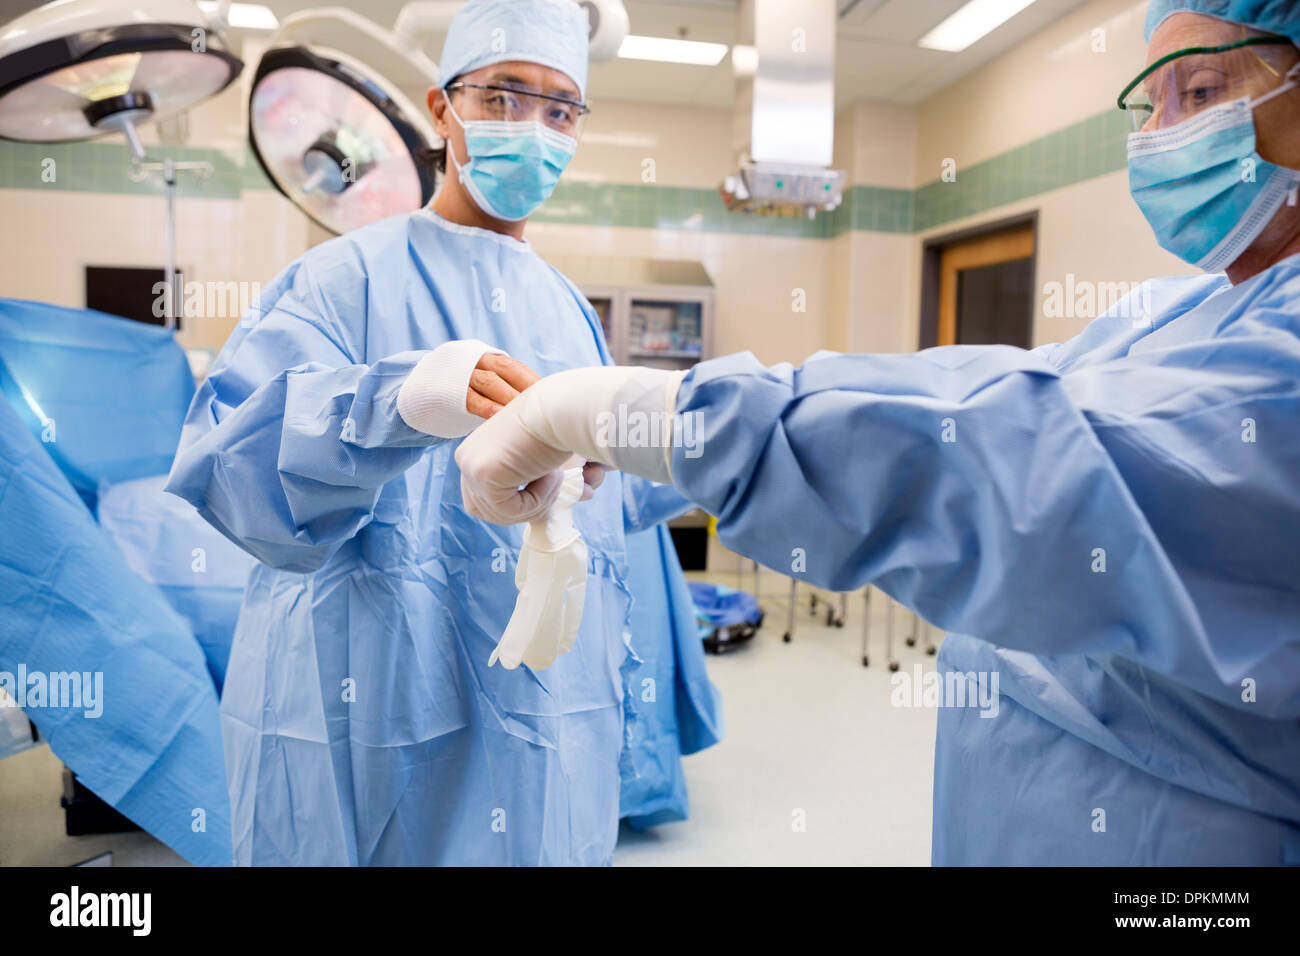 Nurse Assisting Doctor with Sterile Glove Stock Photo